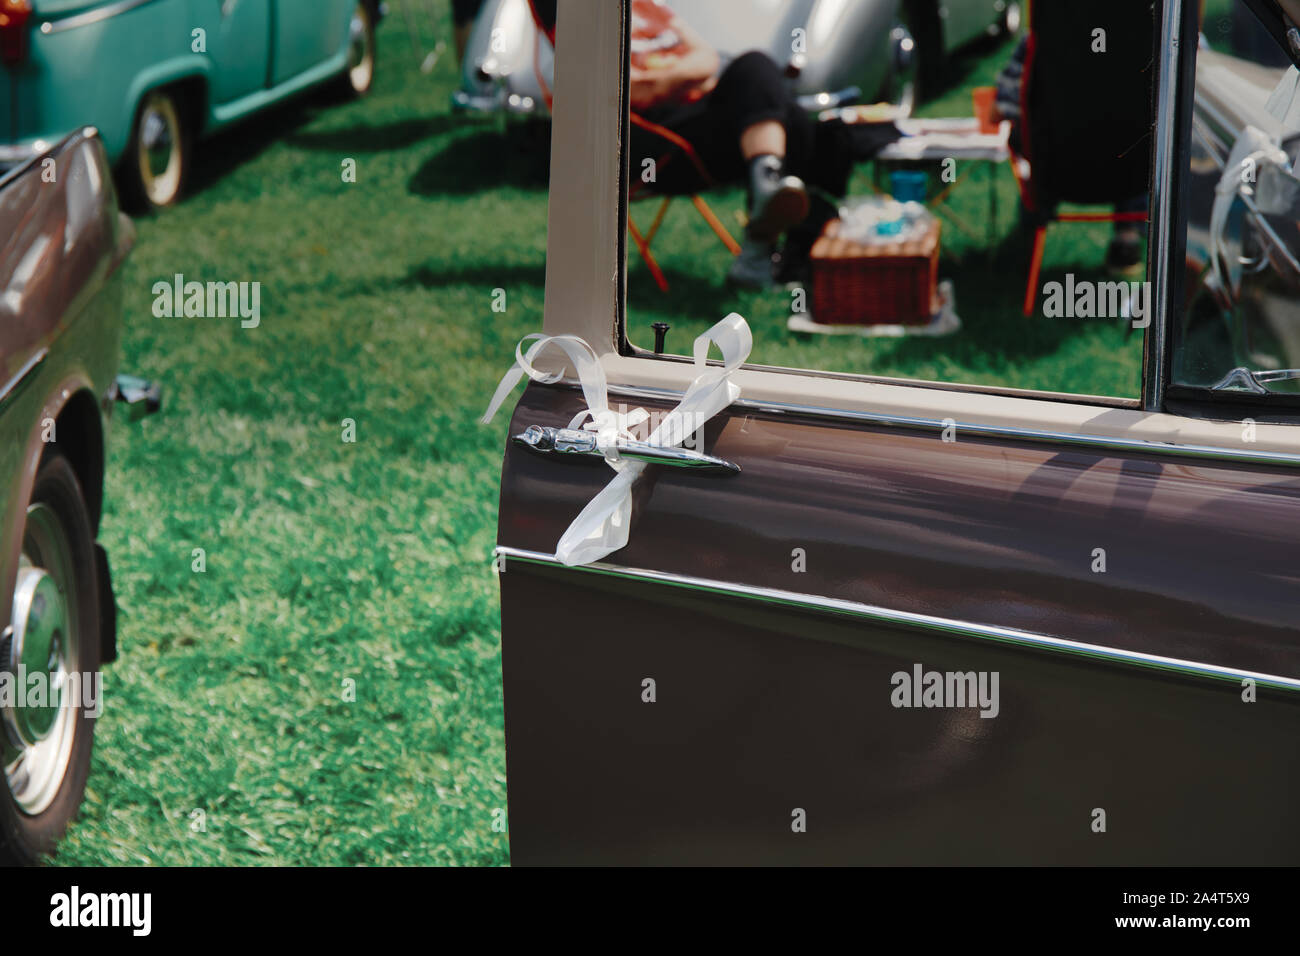 Ribbon tied to classic car door with people eating from hamper in background, Autokarna 2019, Wollaton Park, Nottingham, east Midlands, England Stock Photo